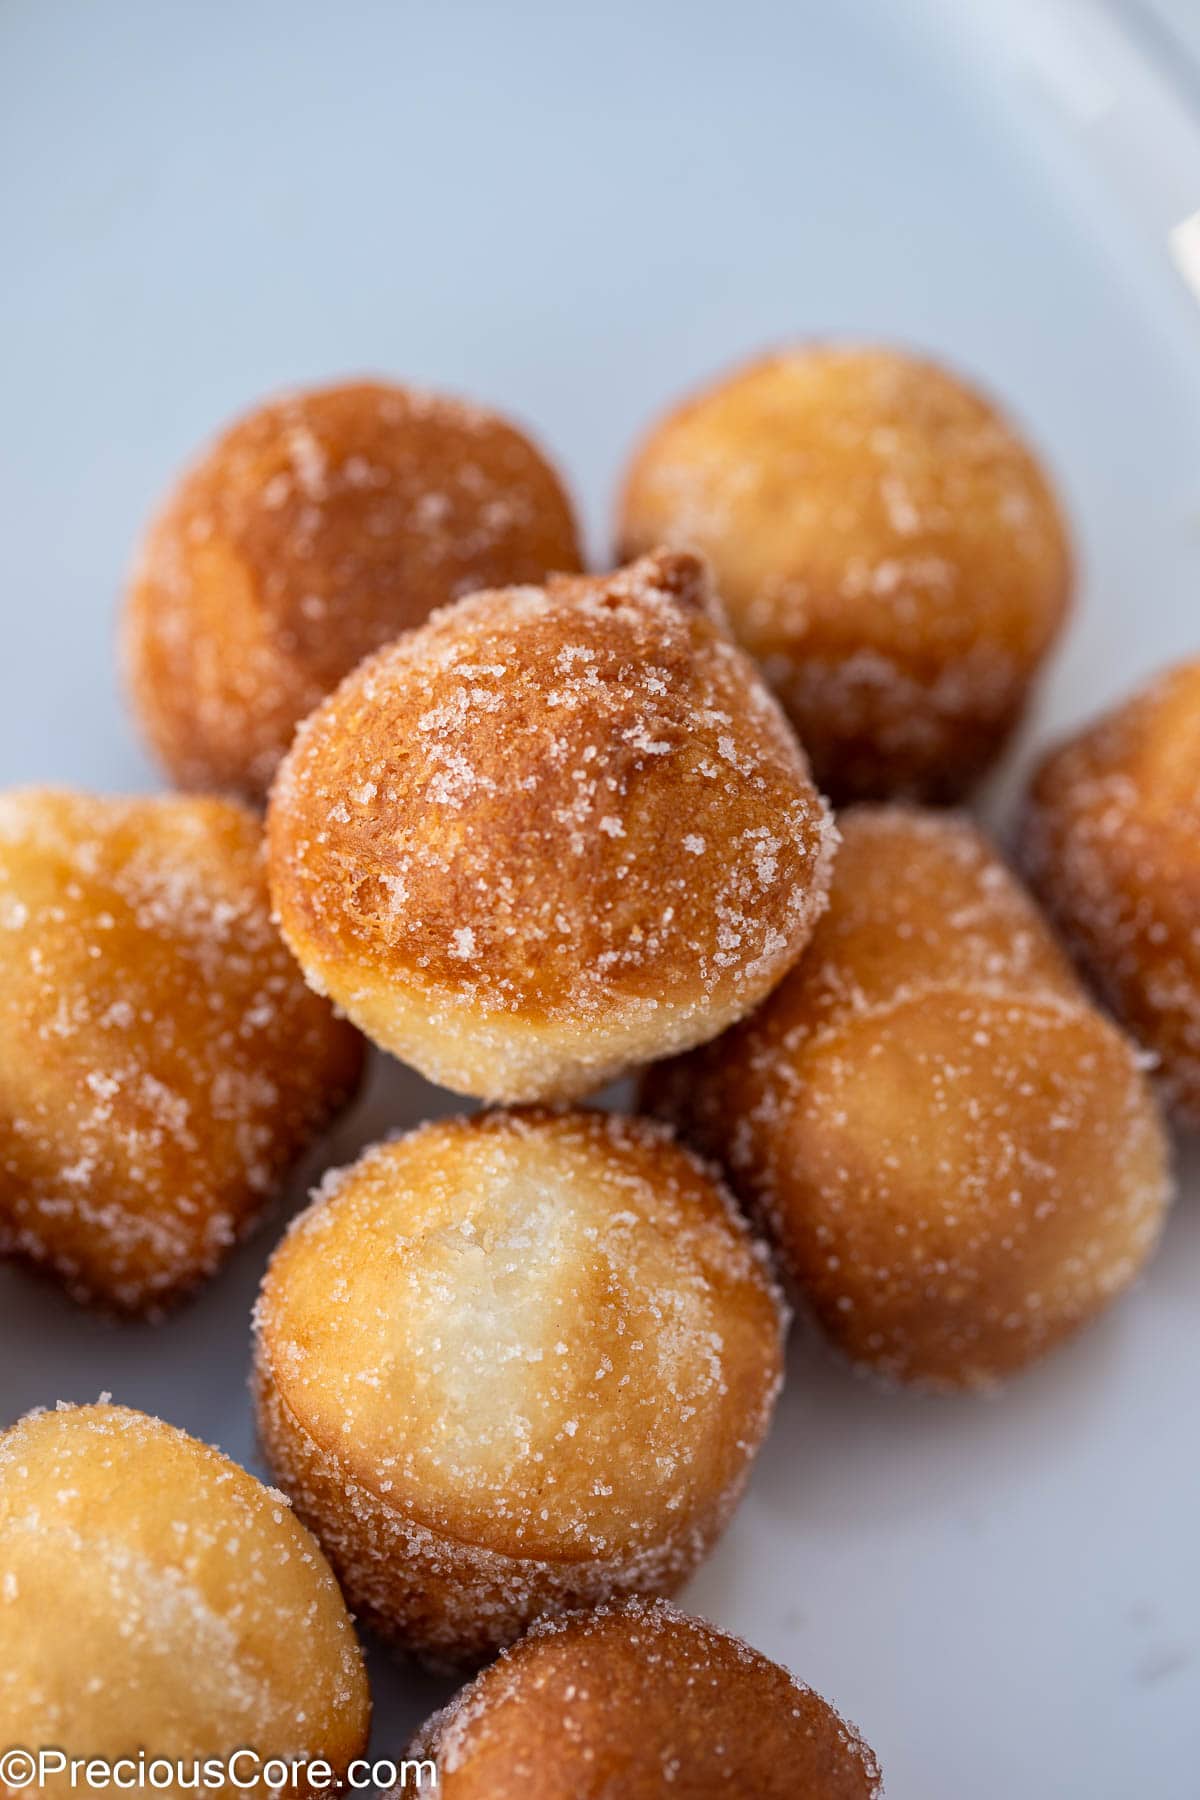 Donut holes coated with sugar.